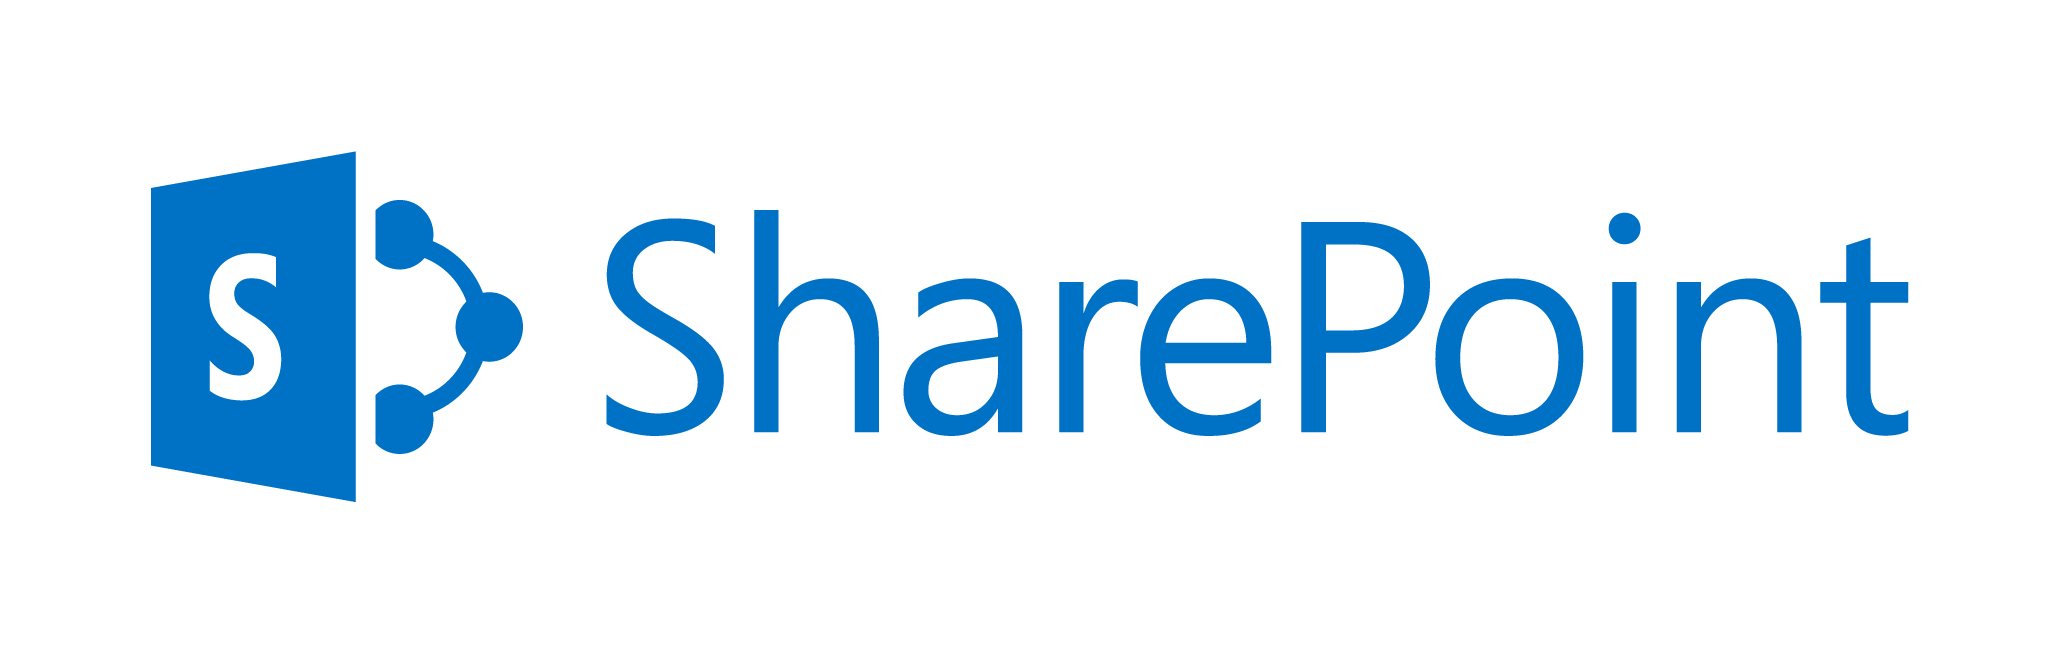 What does the future hold for SharePoint? by Bob Kreha